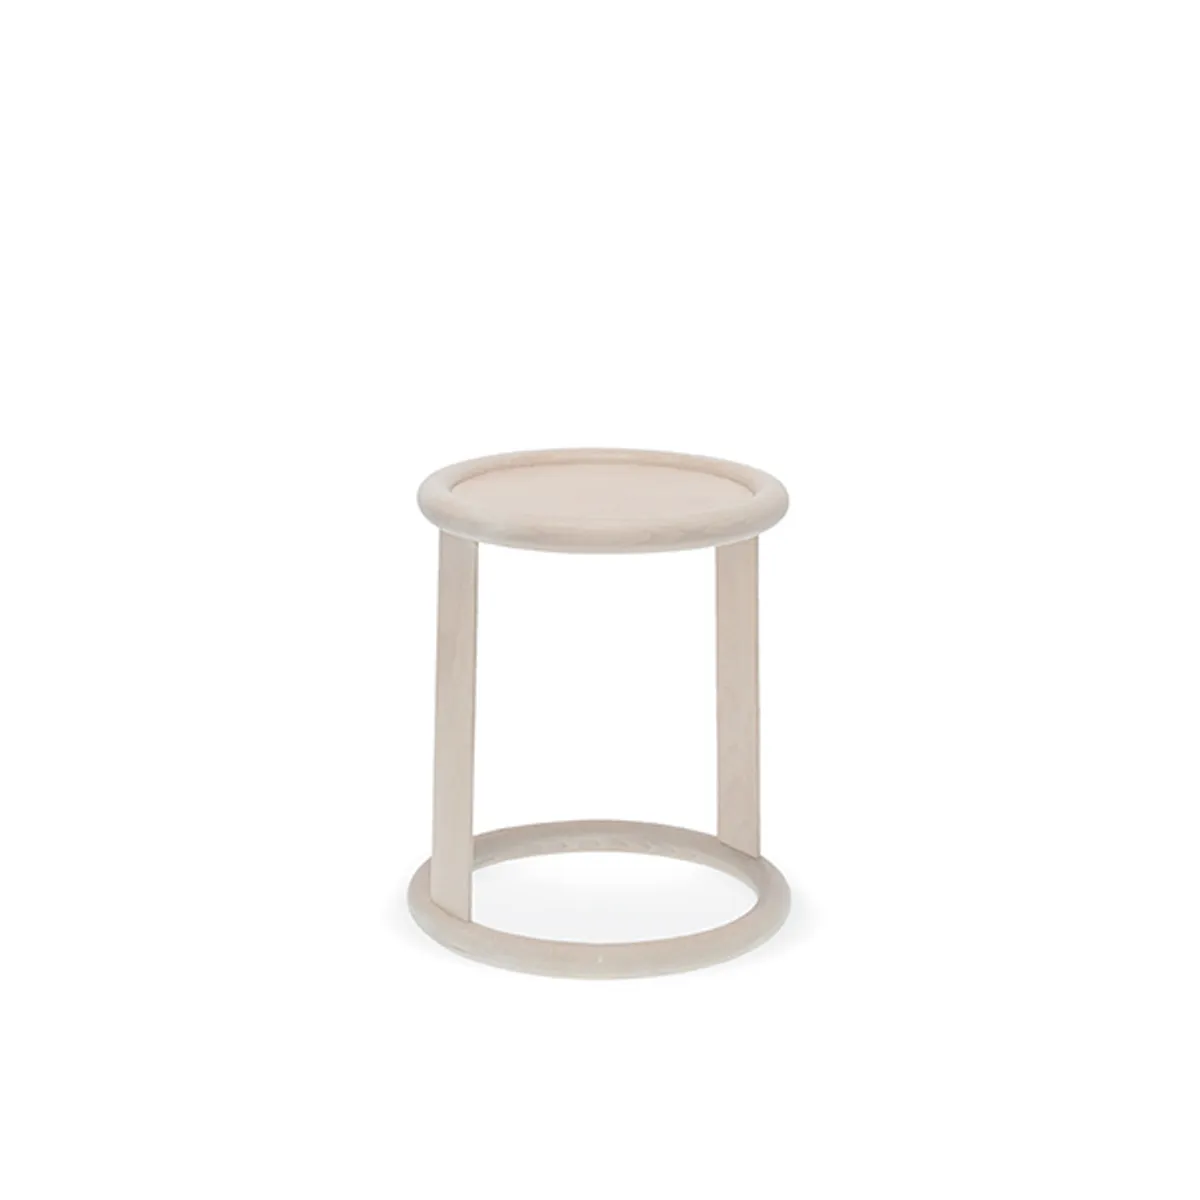 Bakerloo Side Table Contemporary Hotel Furniture By Insideoutcontracts 022